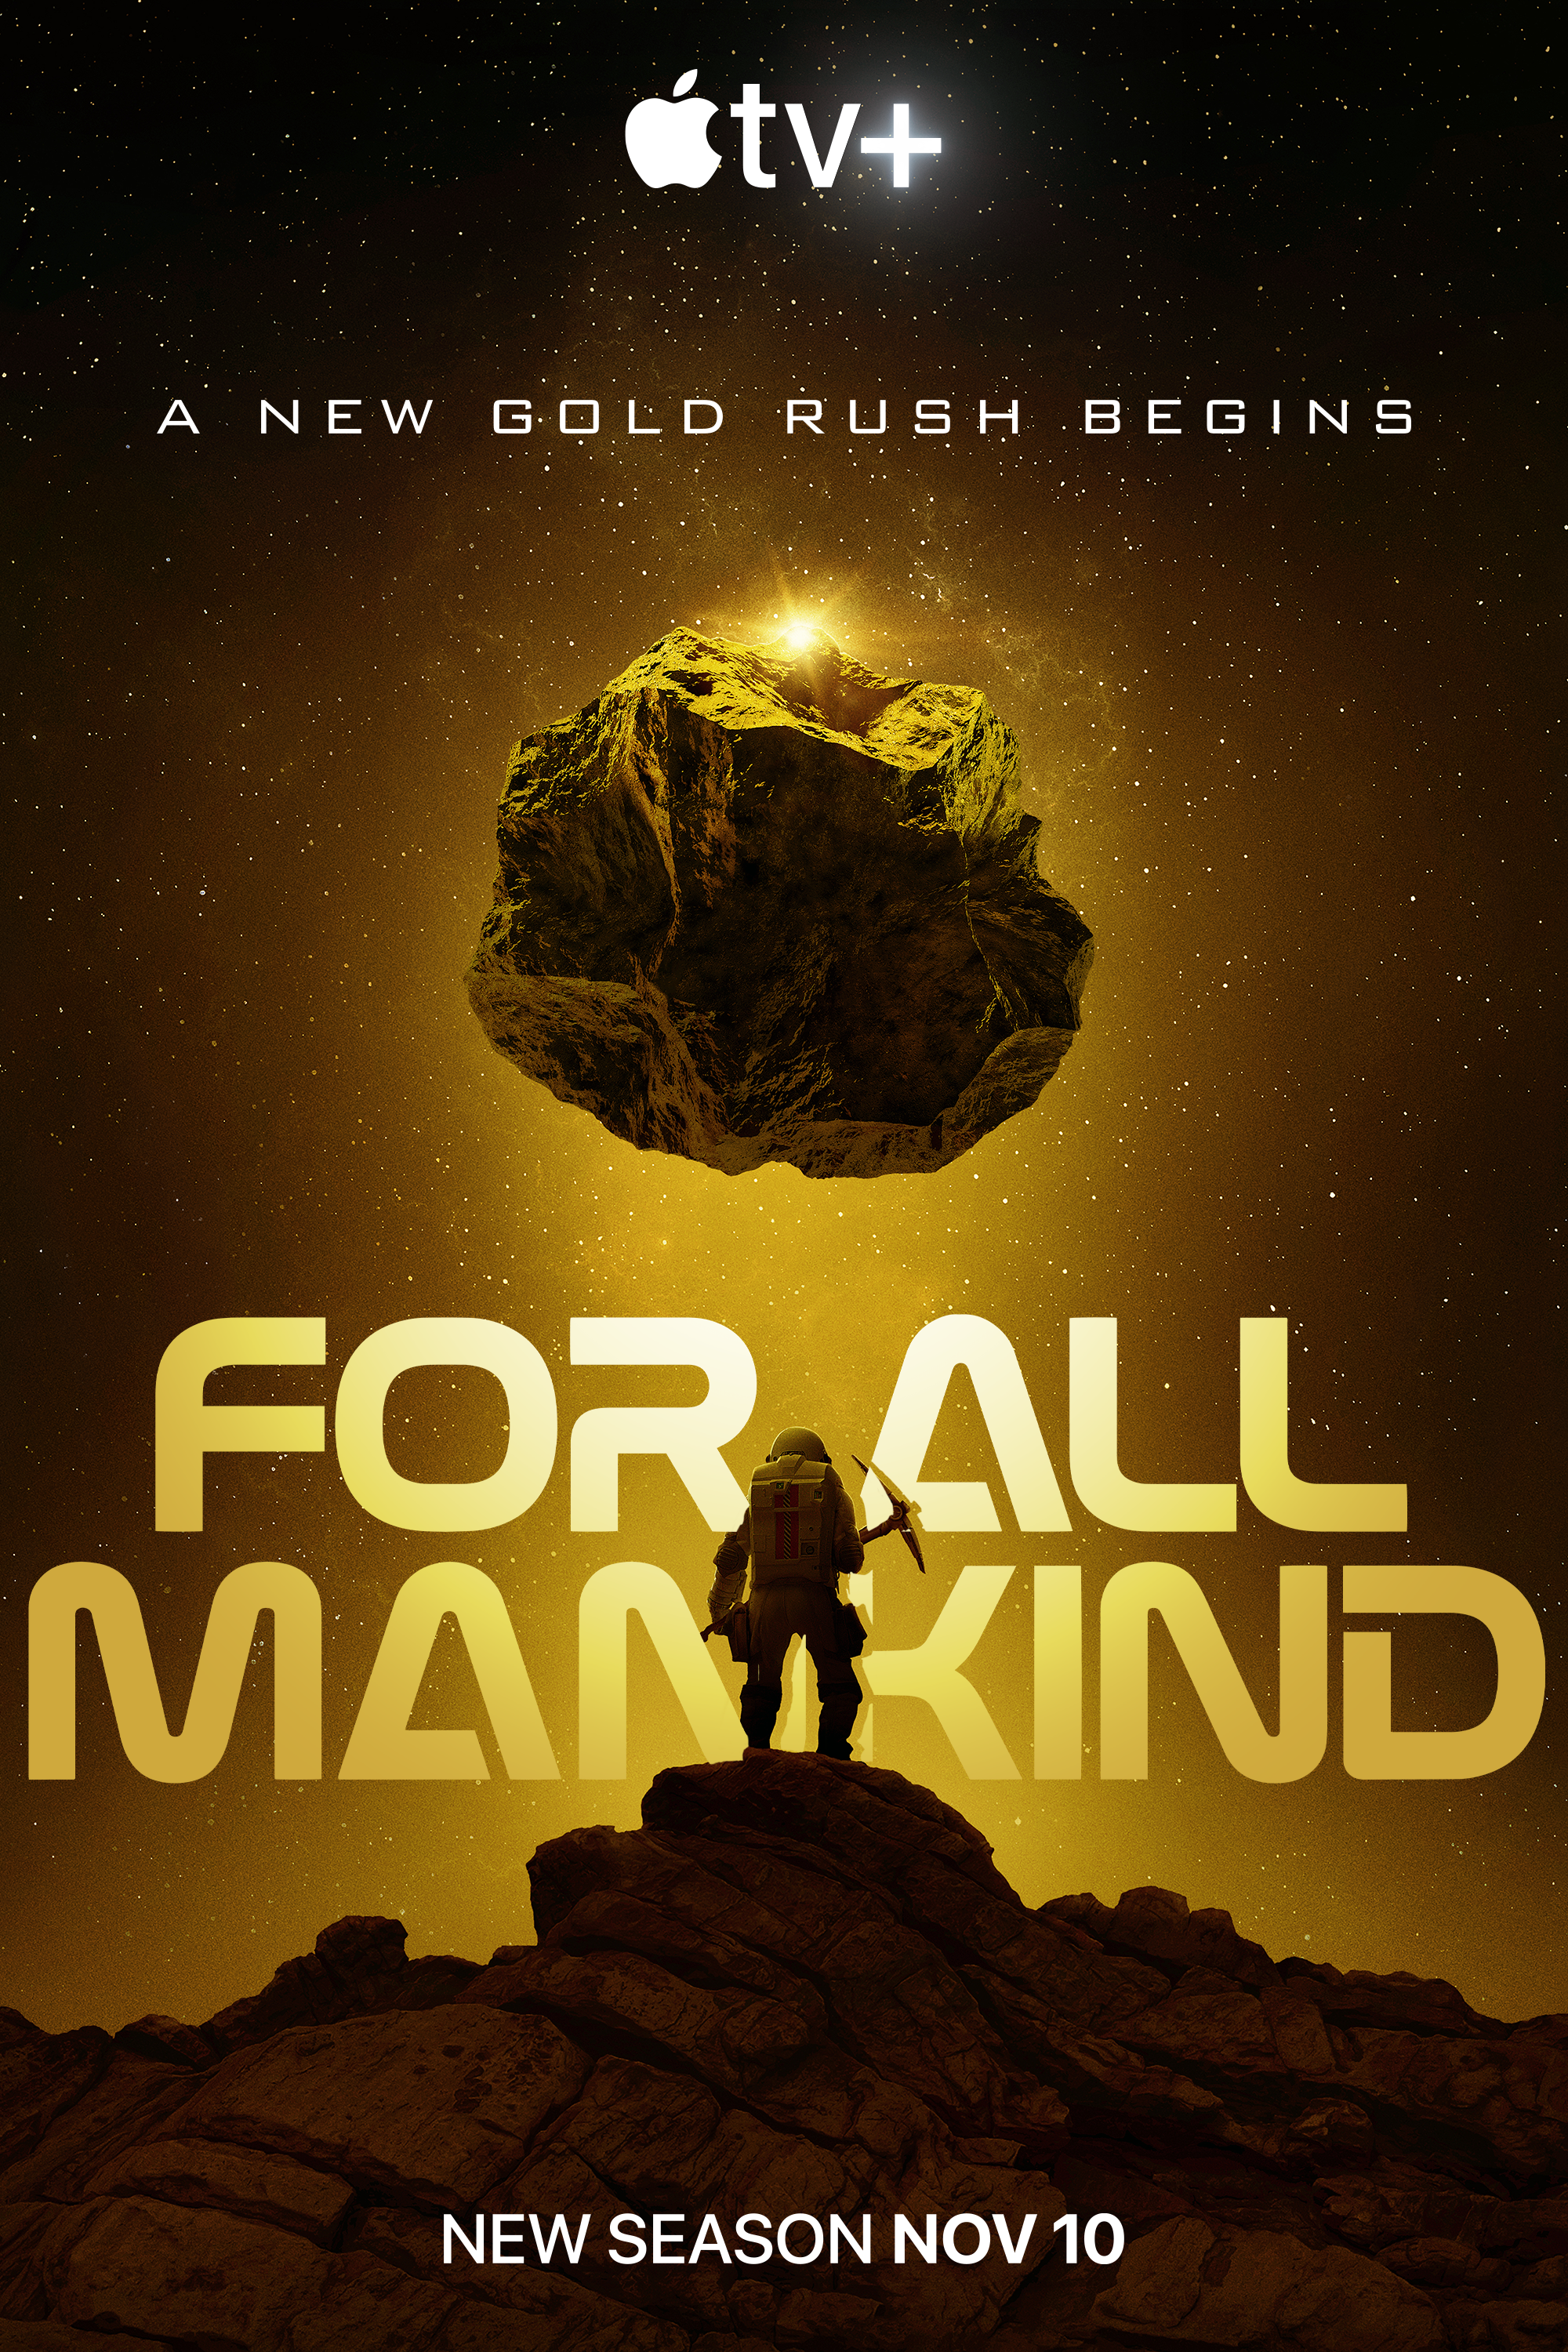 https://static.wikia.nocookie.net/for-all-mankind/images/6/65/For_All_Mankind_season_4_poster.png/revision/latest?cb=20231012225436